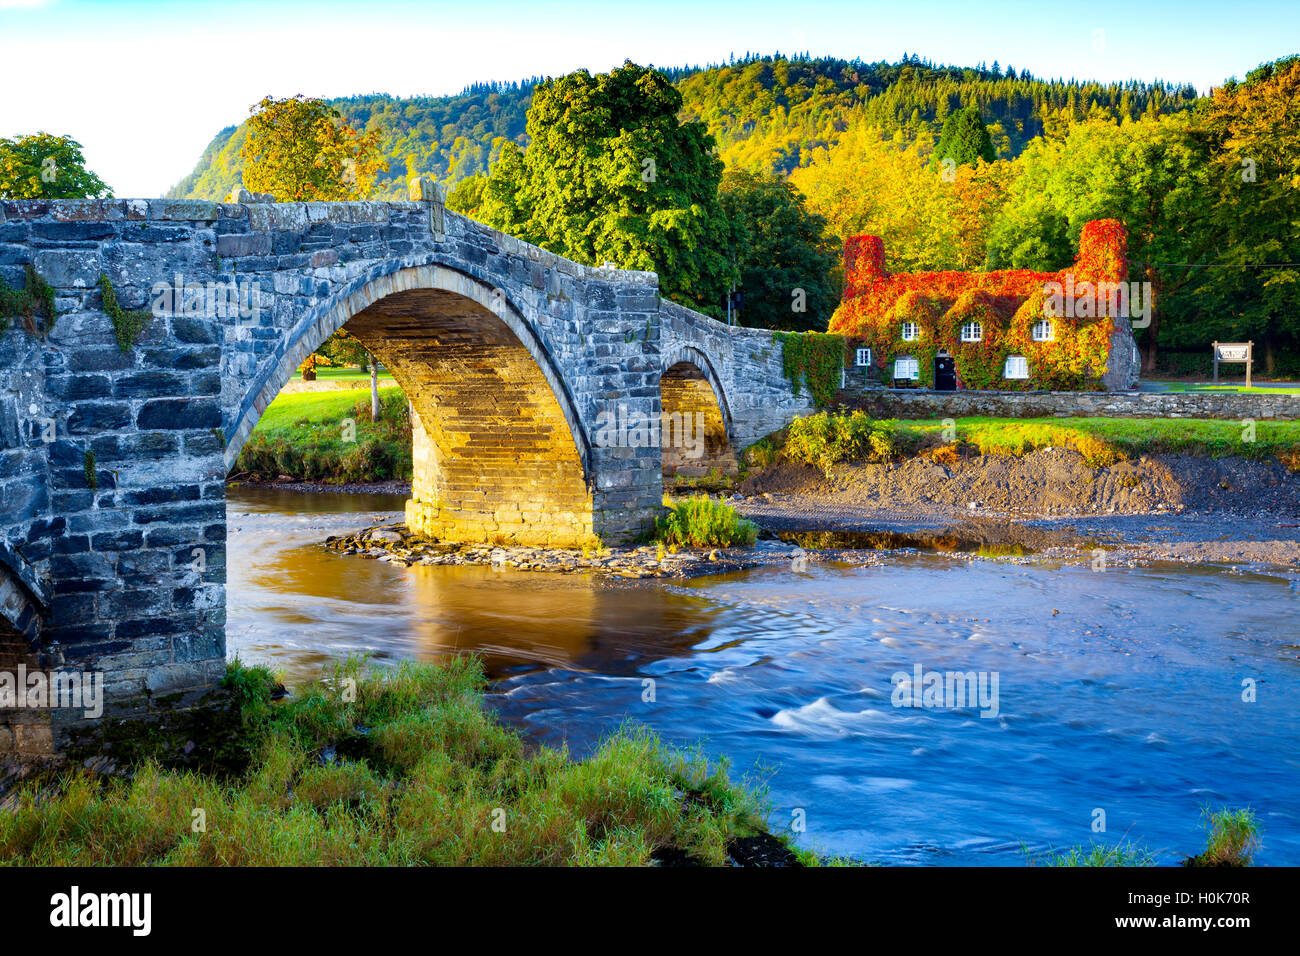 Llanrwst, Conwy, Wales, UK  The sunrise bathes Llanrwst Tu Hwnt I’r Bont Tea Room or Hwnt i’r Bont Tearooms on the day of the Autumn Equinox. The time or date (twice each year) at which the sun crosses the celestial equator, when day and night are of equal length. Stock Photo